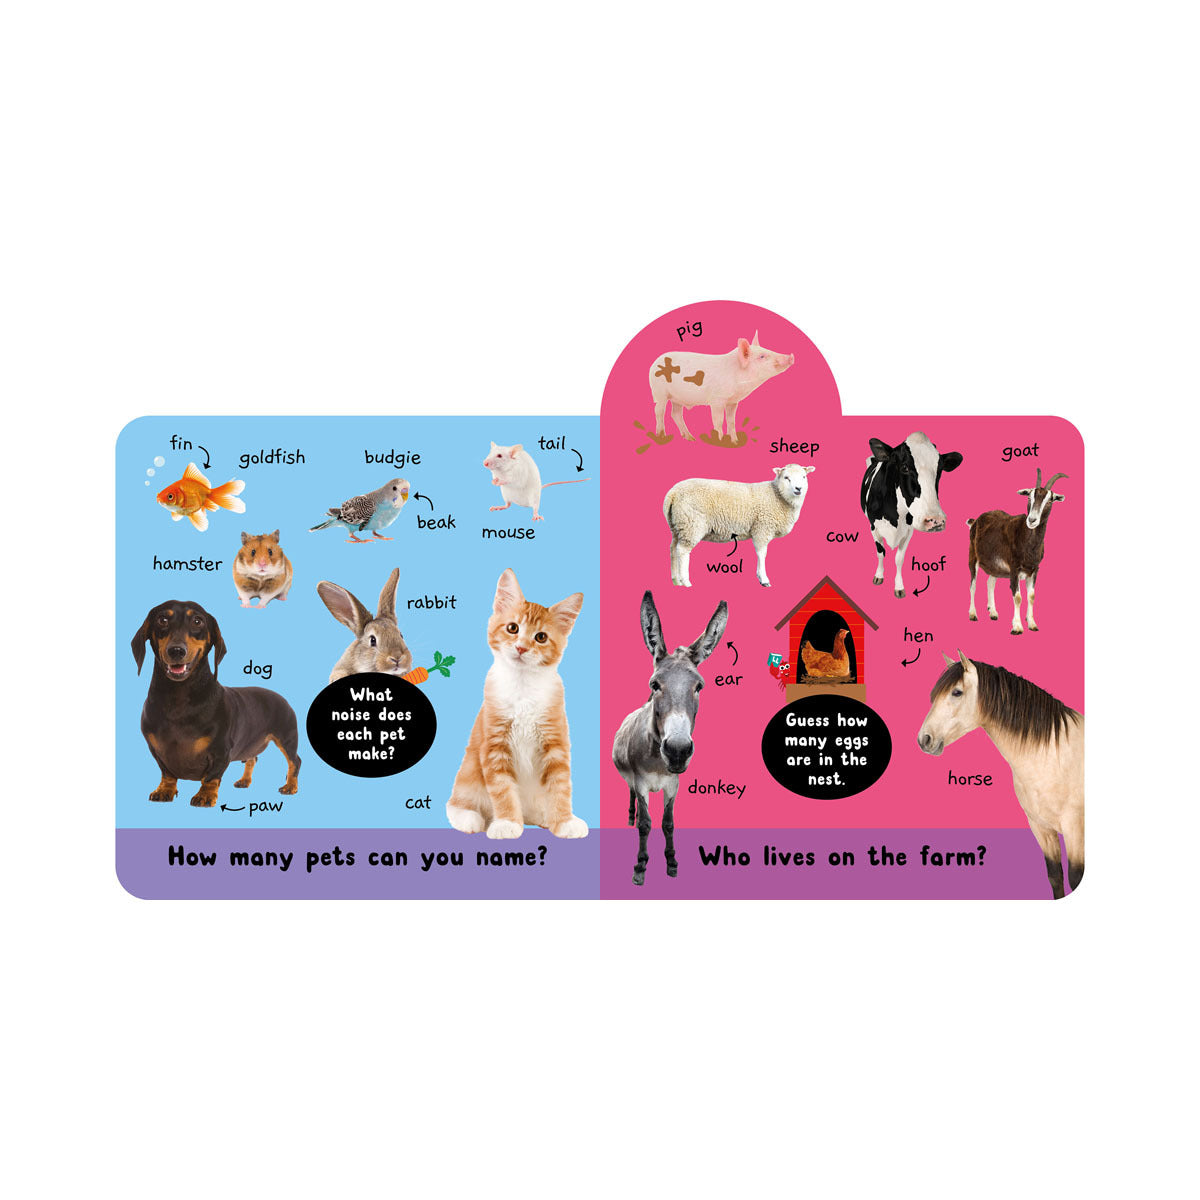 Early Learning Centre - 100 Words Awesome Animals Board Book